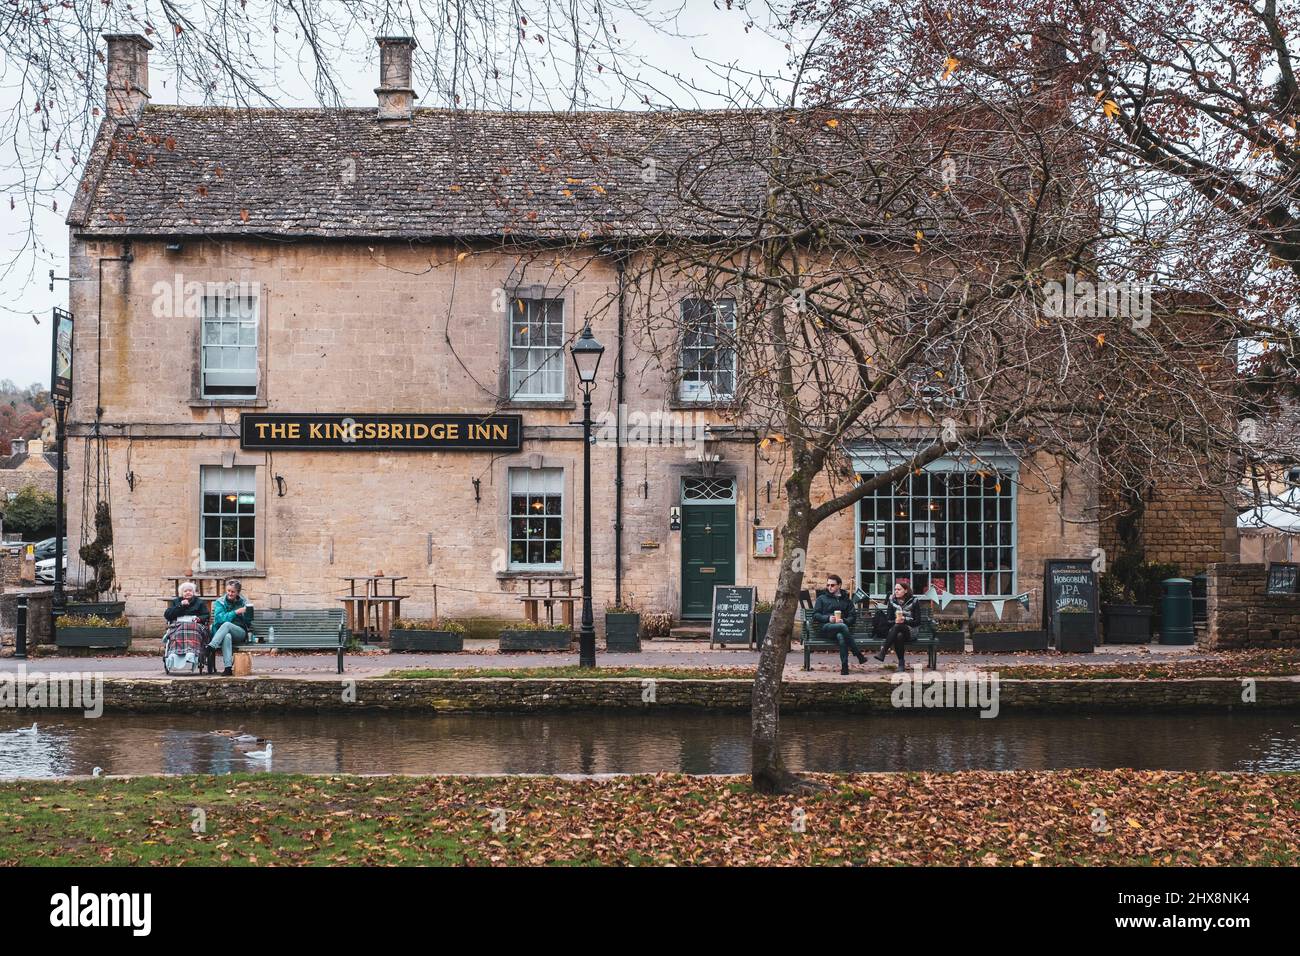 People take a pause on benches outside a traditional pub in this sleepy Cotswold town. Stock Photo